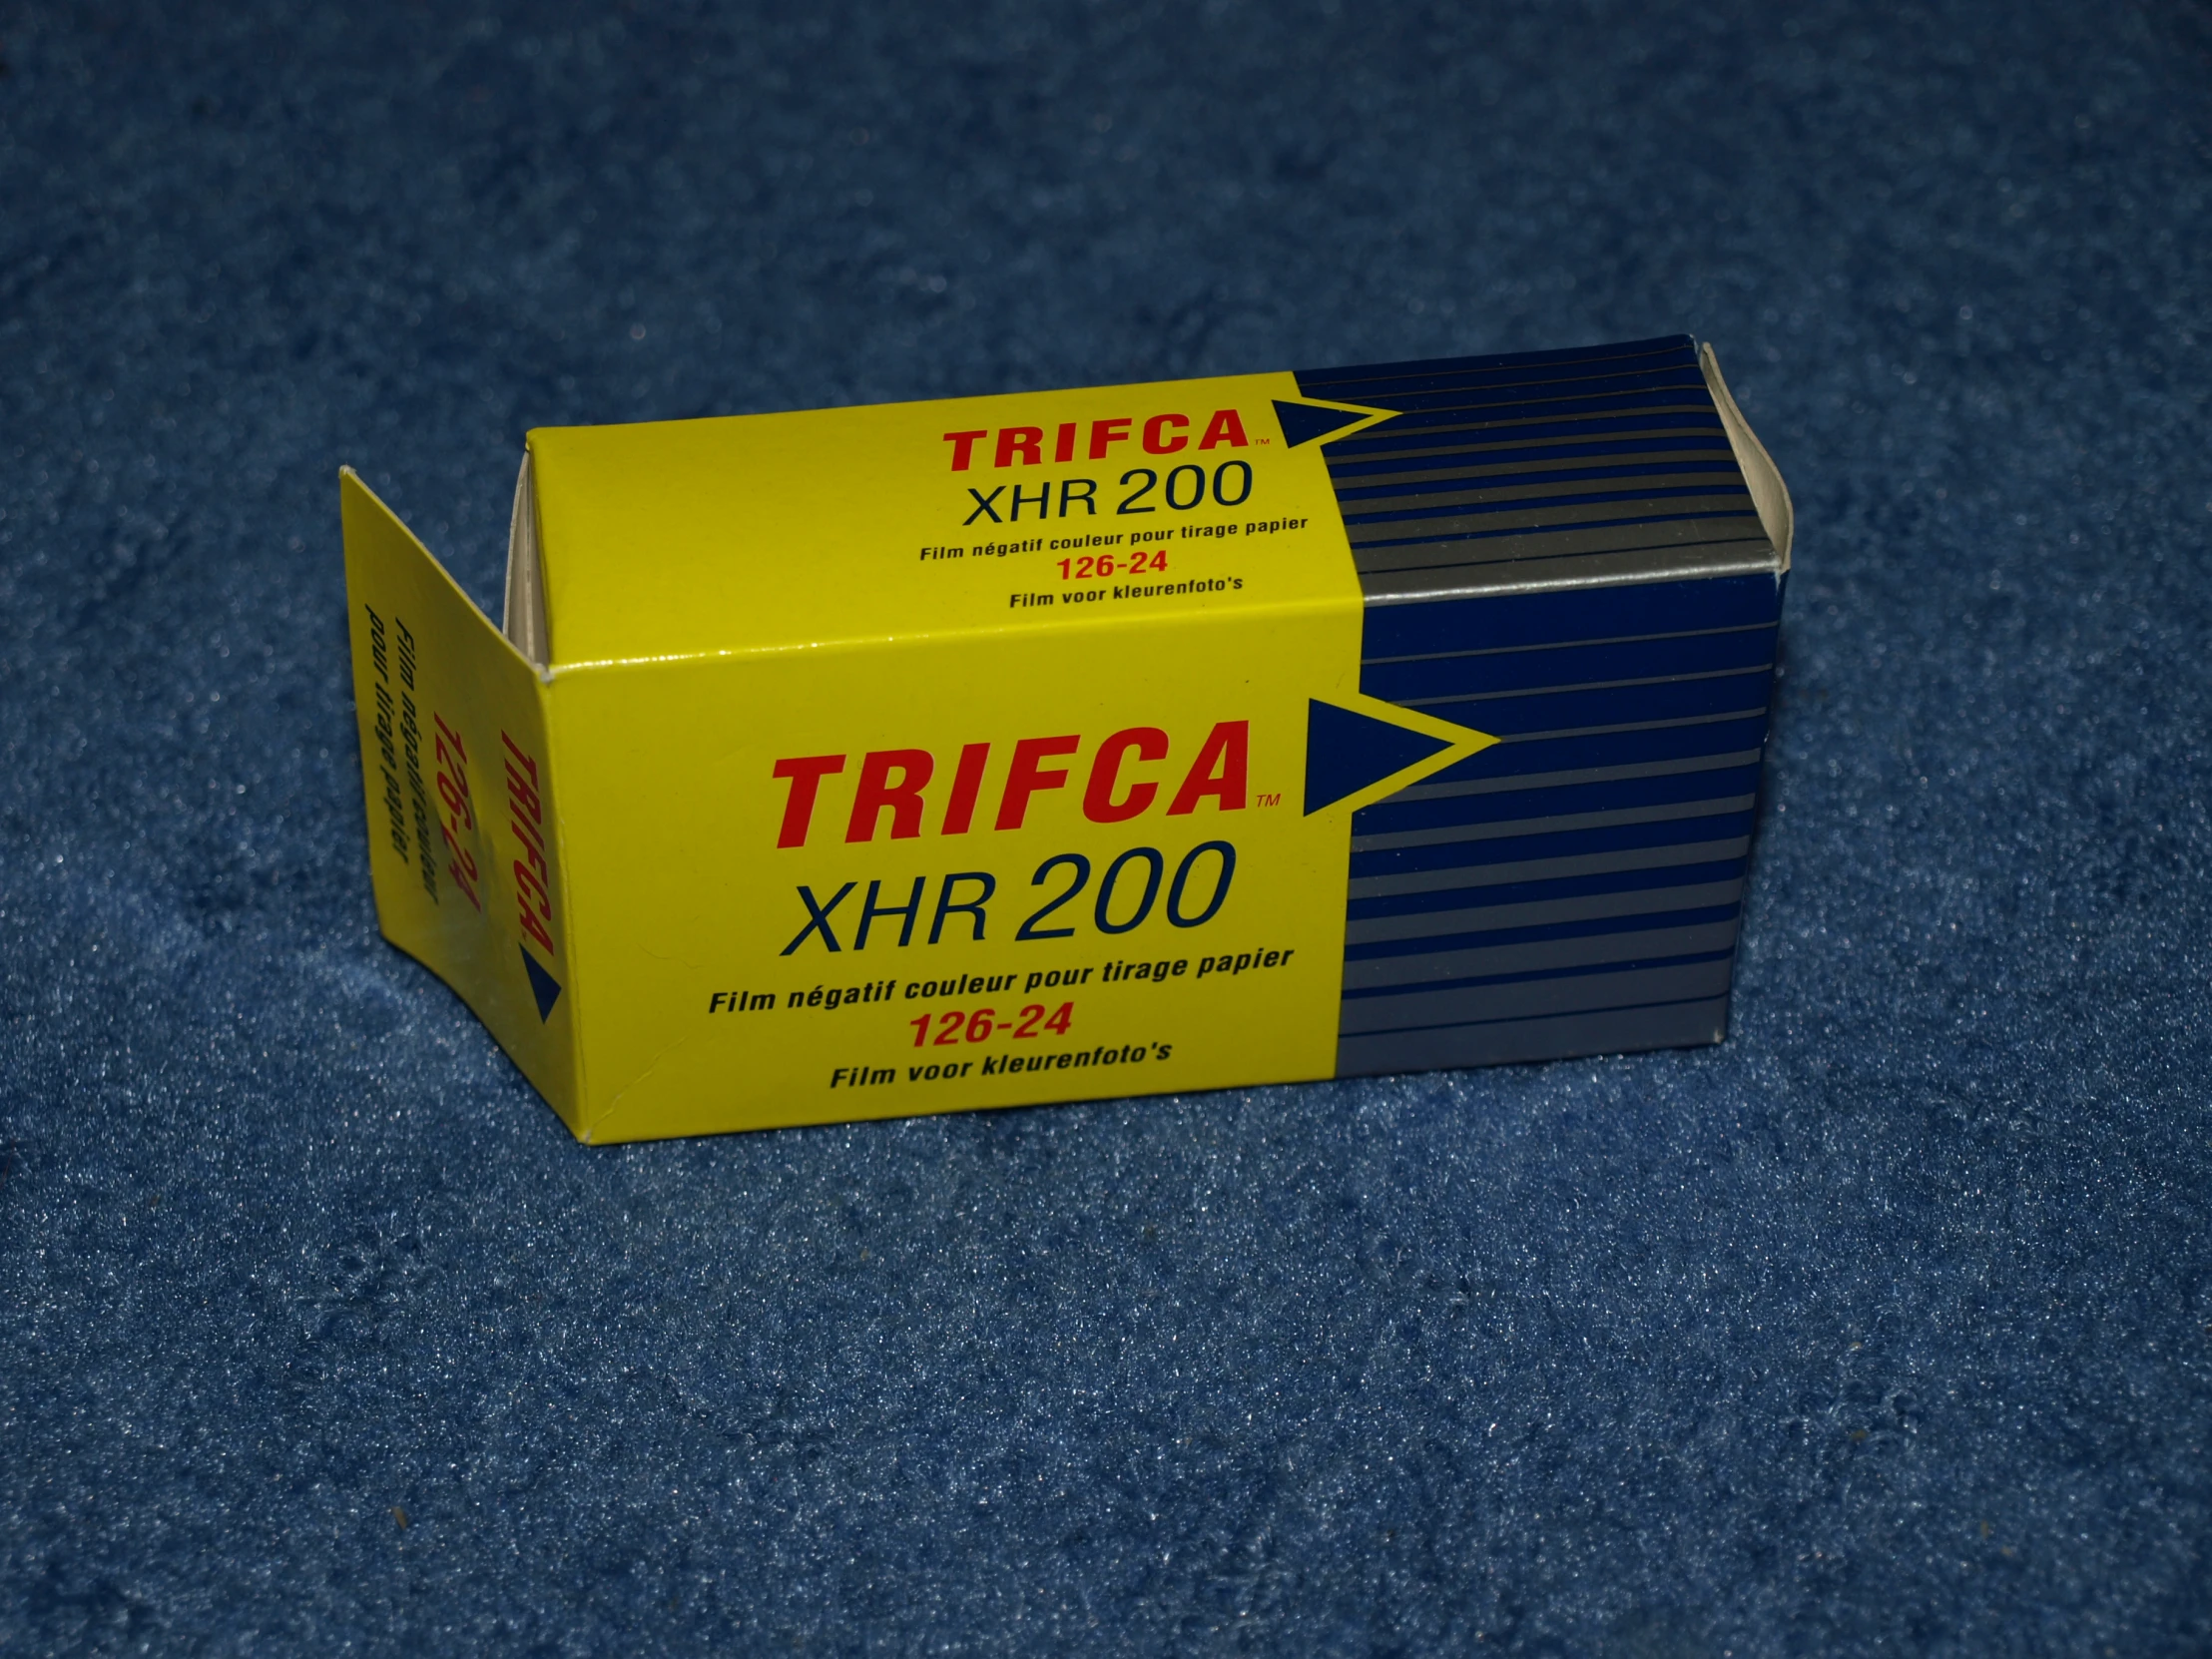 the box is marked trifca